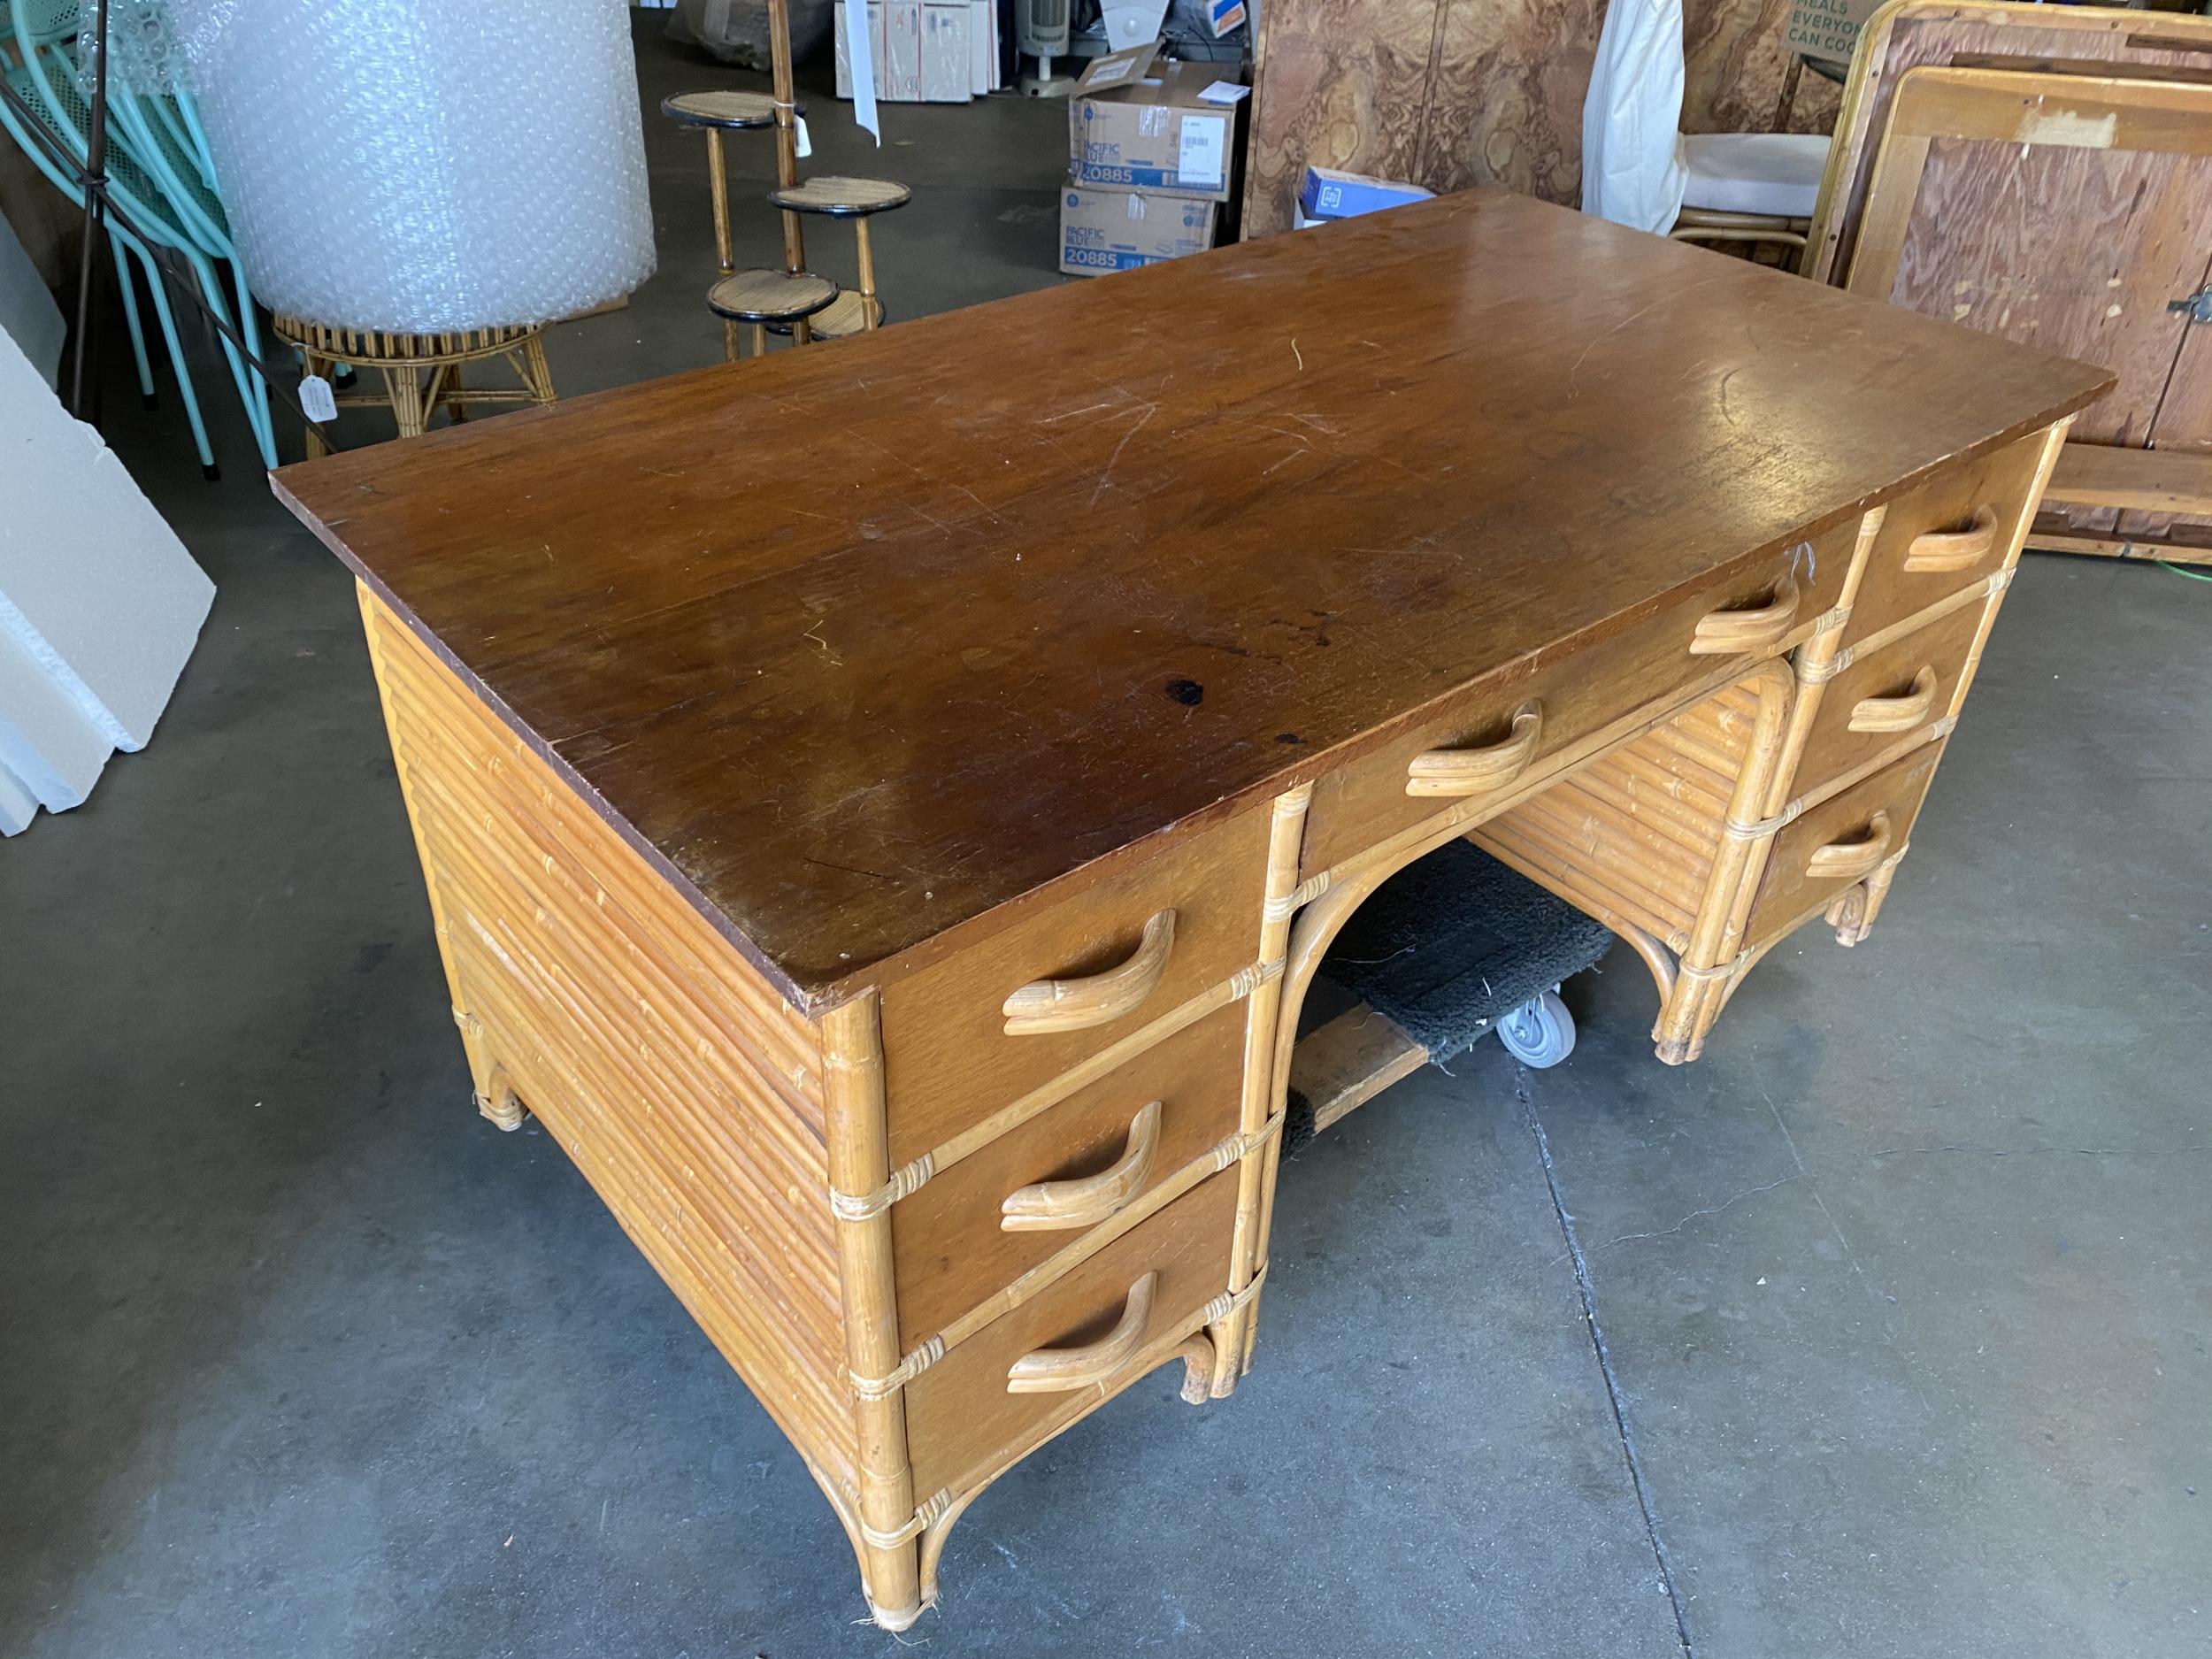 Restored very large stacked rattan desk, with Filipino mahogany. Drawer fronts, side panels, and top. The desk features a center drawer and six side drawers. Beautiful stacked rattan legs race from the top to the bottom, creating a great modern